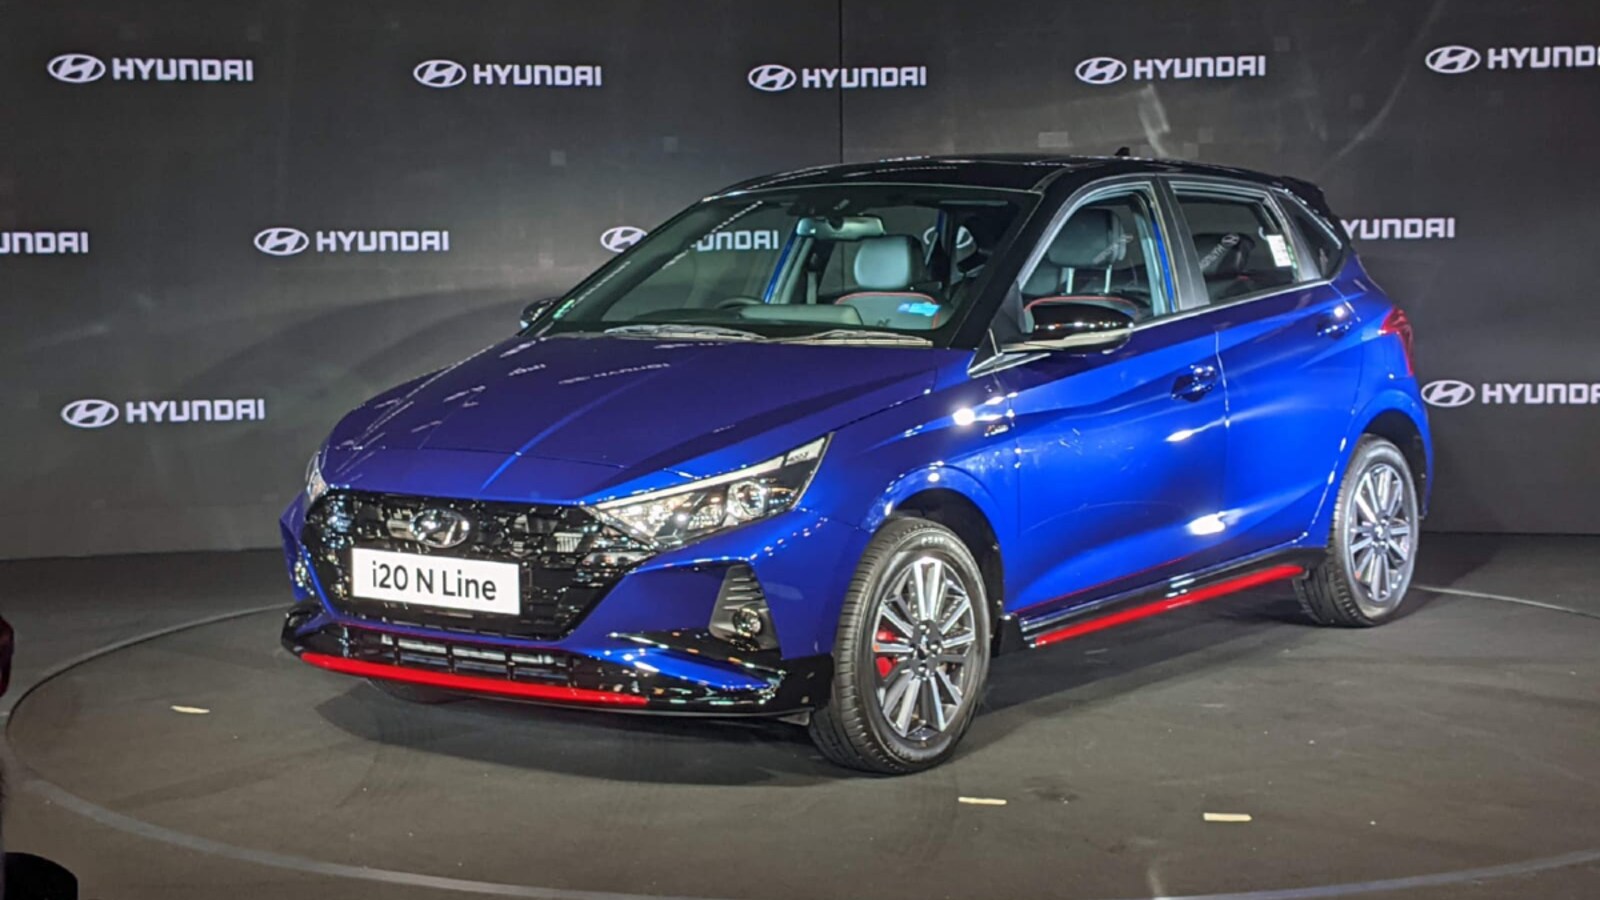 Upcoming Hyundai i20 N Line Performance Hatchback Unveiled in India;  Details Here - News18